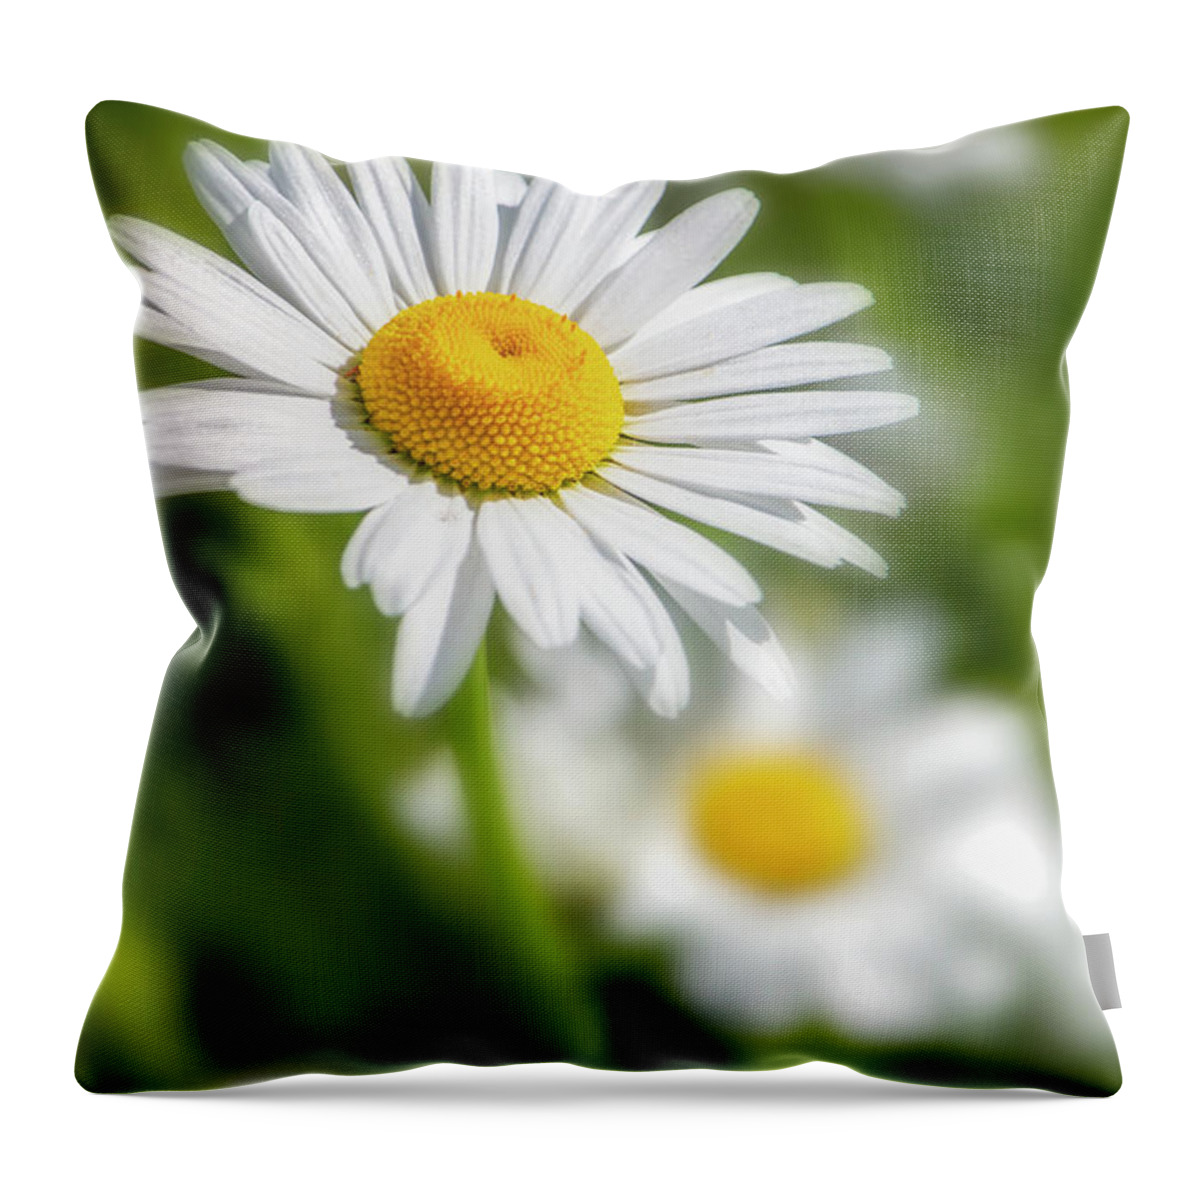 Flower Throw Pillow featuring the photograph Daisy Dreams by TL Wilson Photography by Teresa Wilson